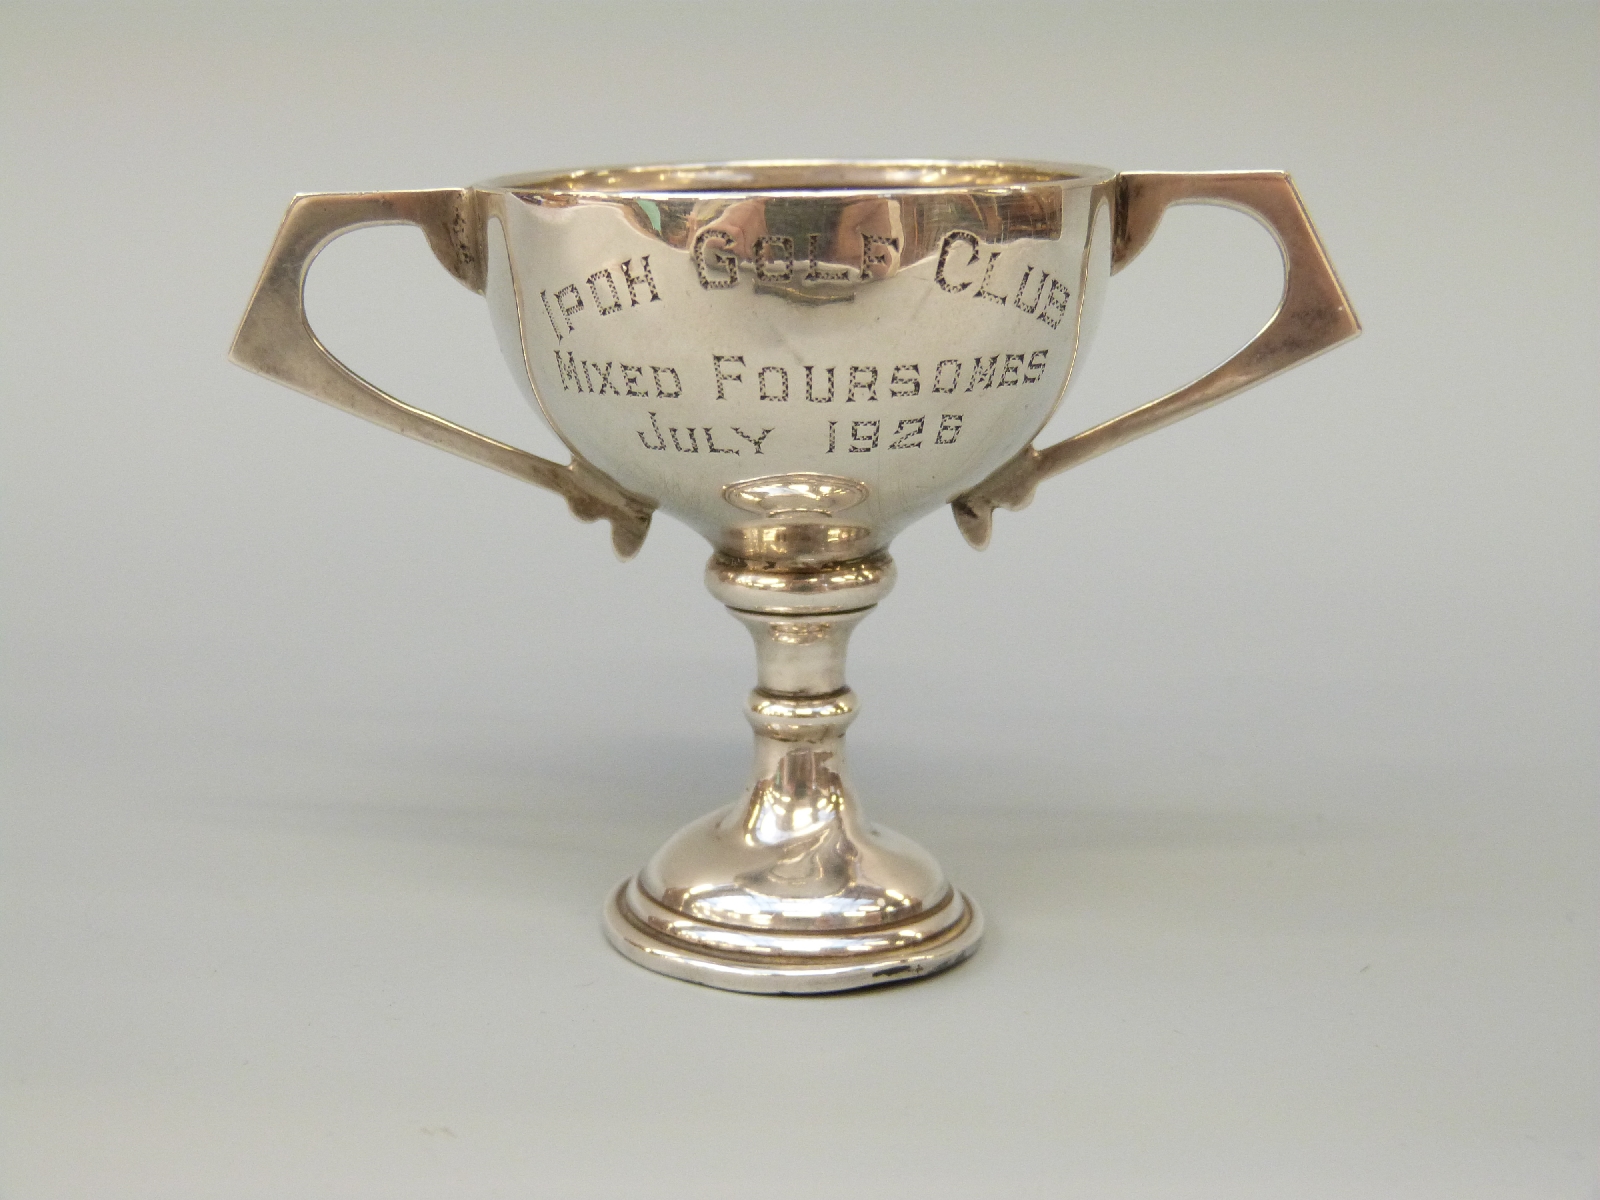 S. Mordan & Co Patent hallmarked silver double ended pen/pencil and a small silver trophy. - Image 2 of 5